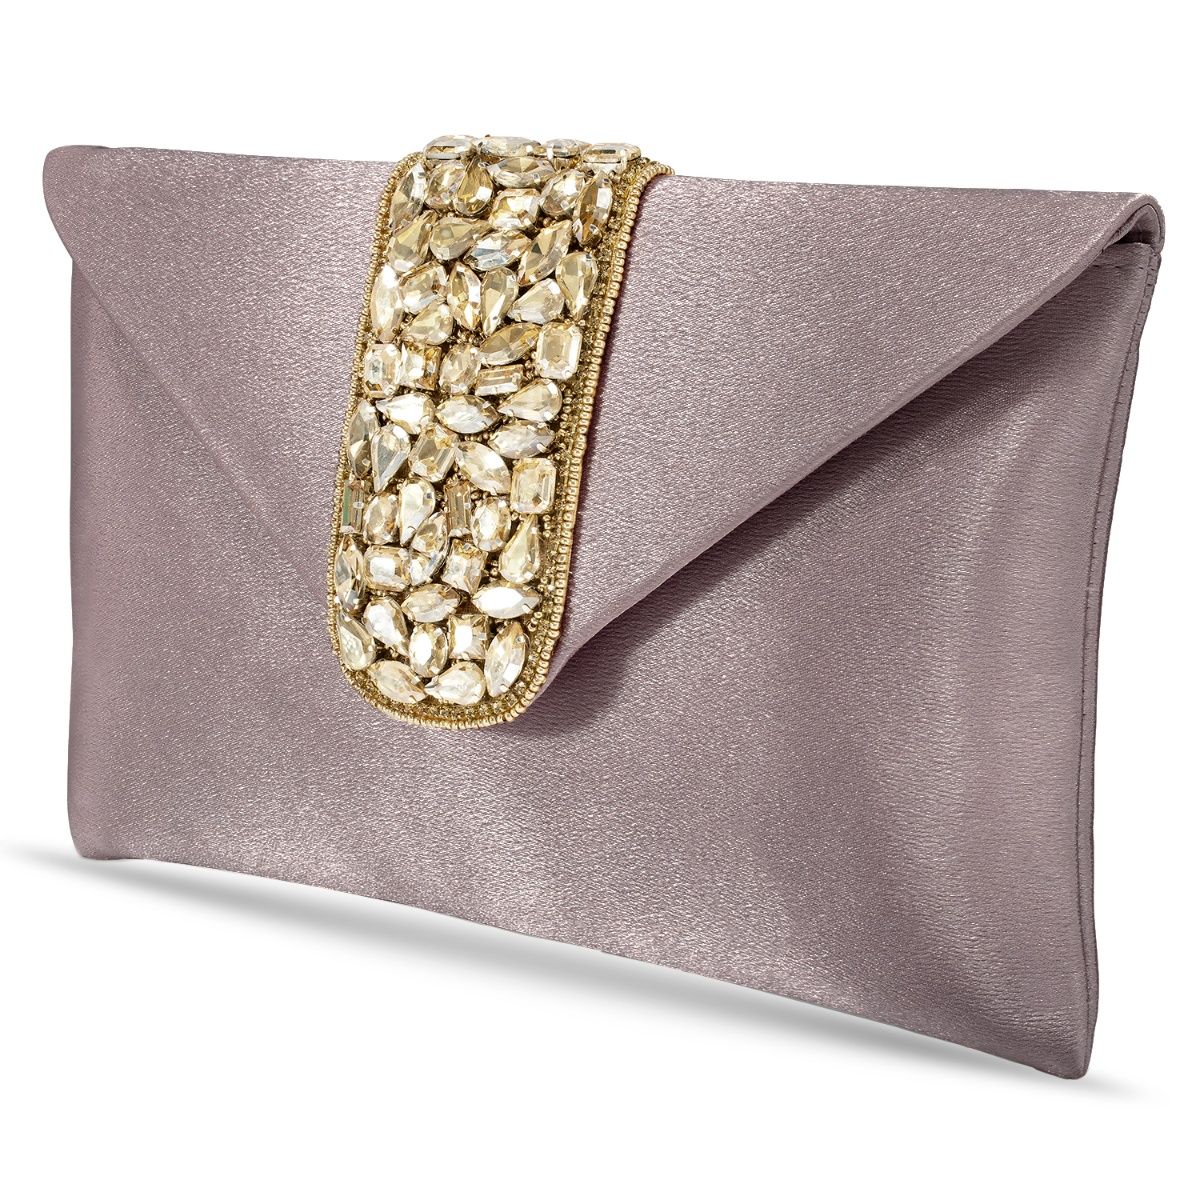 TINDTOP Clutch Purses for Women, Formal Evening Clutch Bags Shoulder  Envelope Party Handbags Wedding Cocktail Prom Clutches (Apricot): Handbags:  Amazon.com